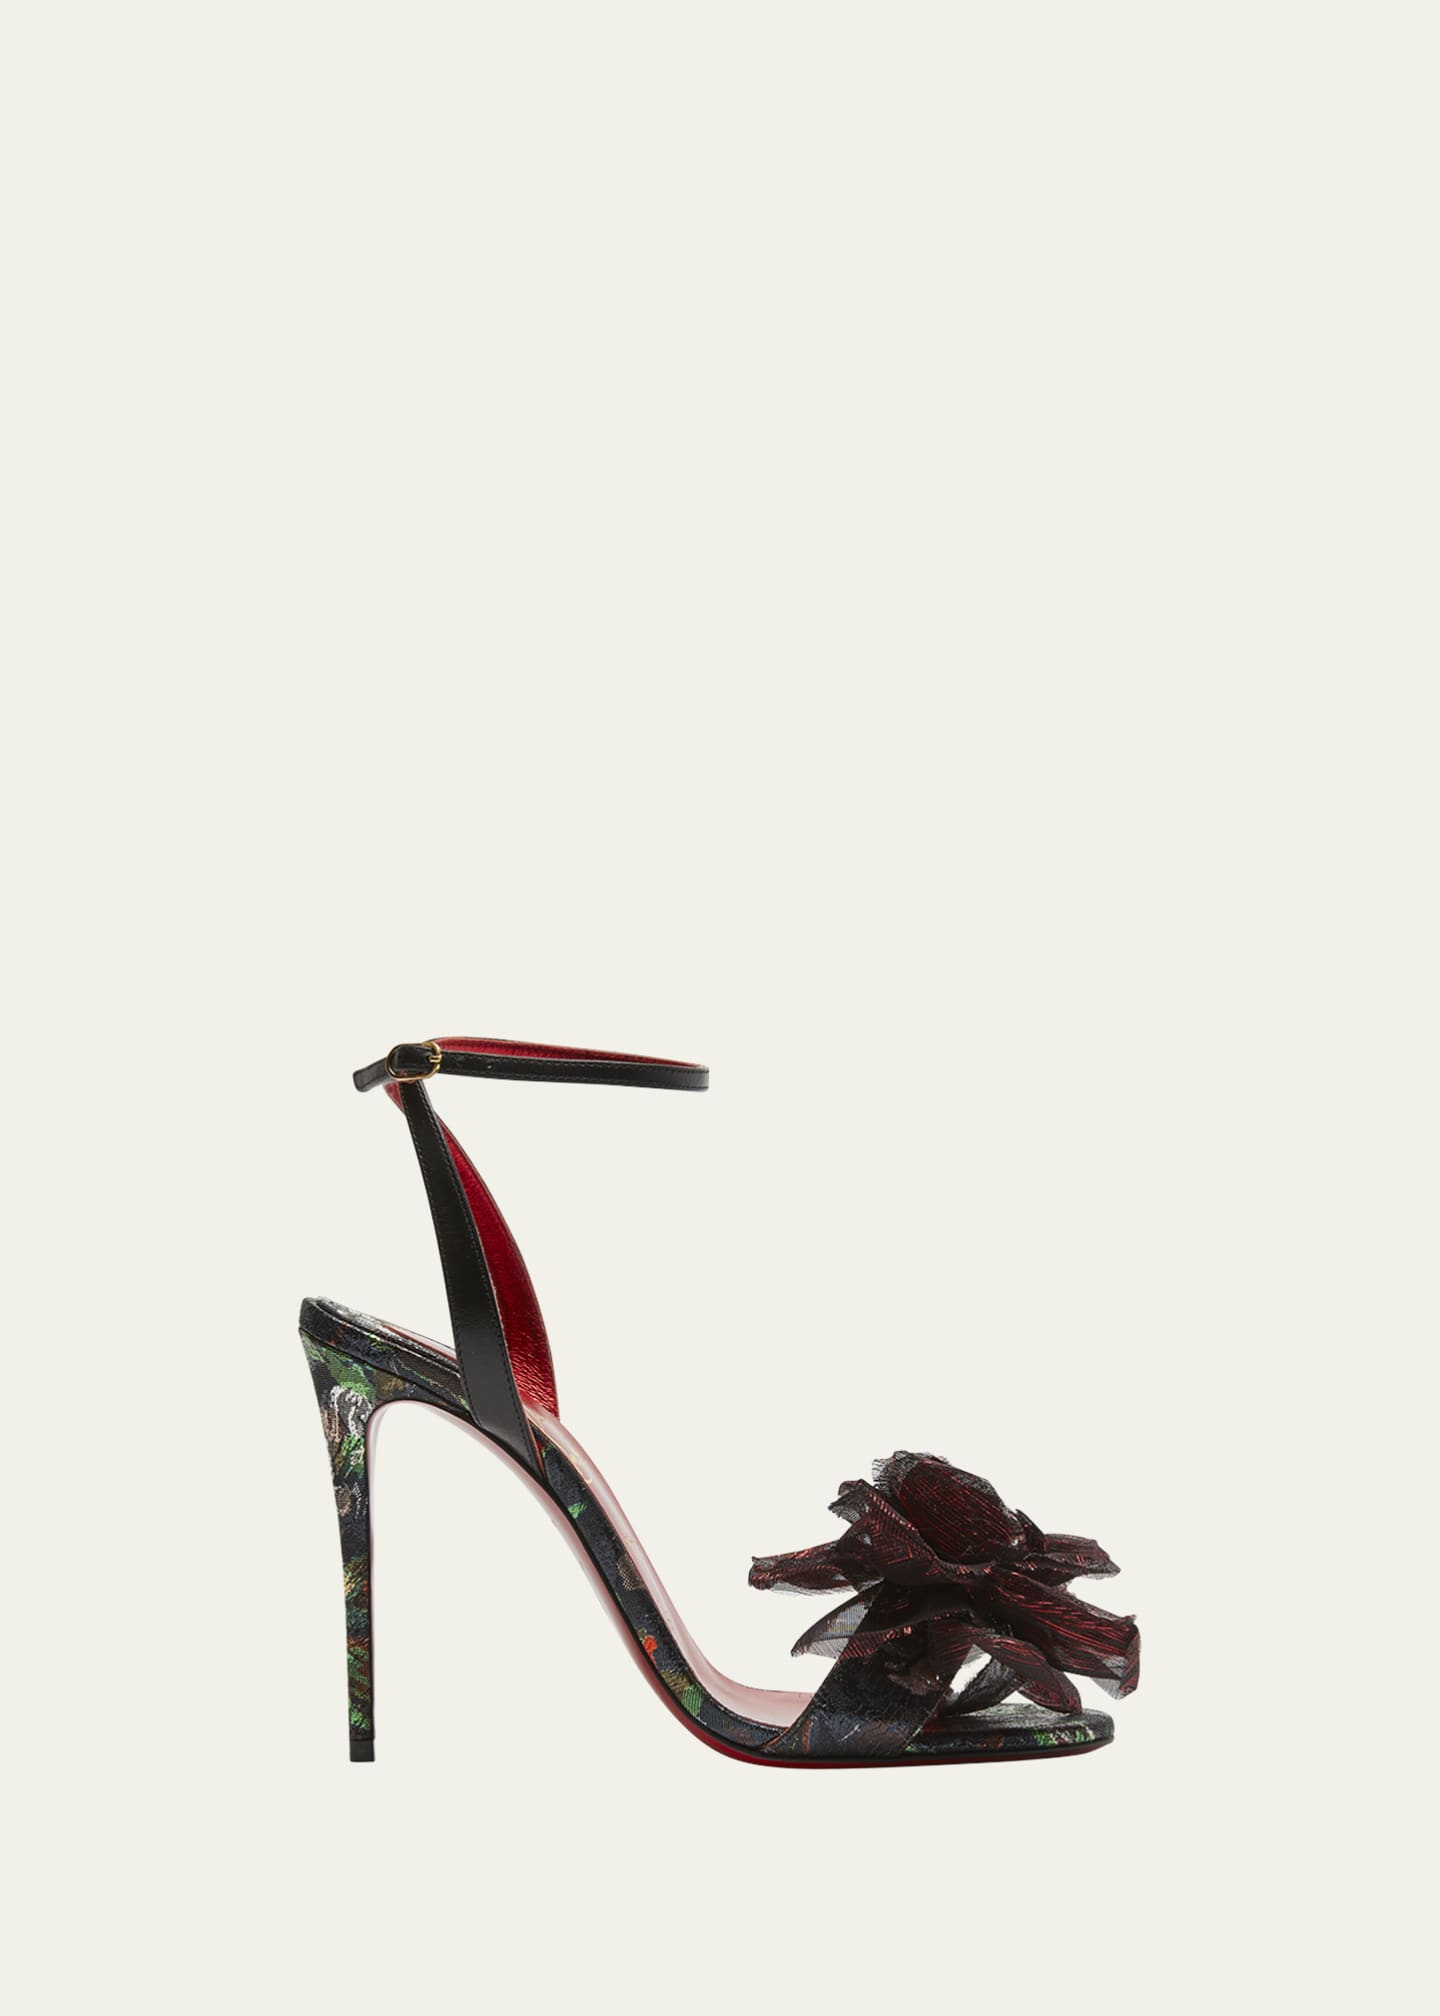 Christian Louboutin Flora Queen Red Sole Ankle-Strap Sandals - Goodman